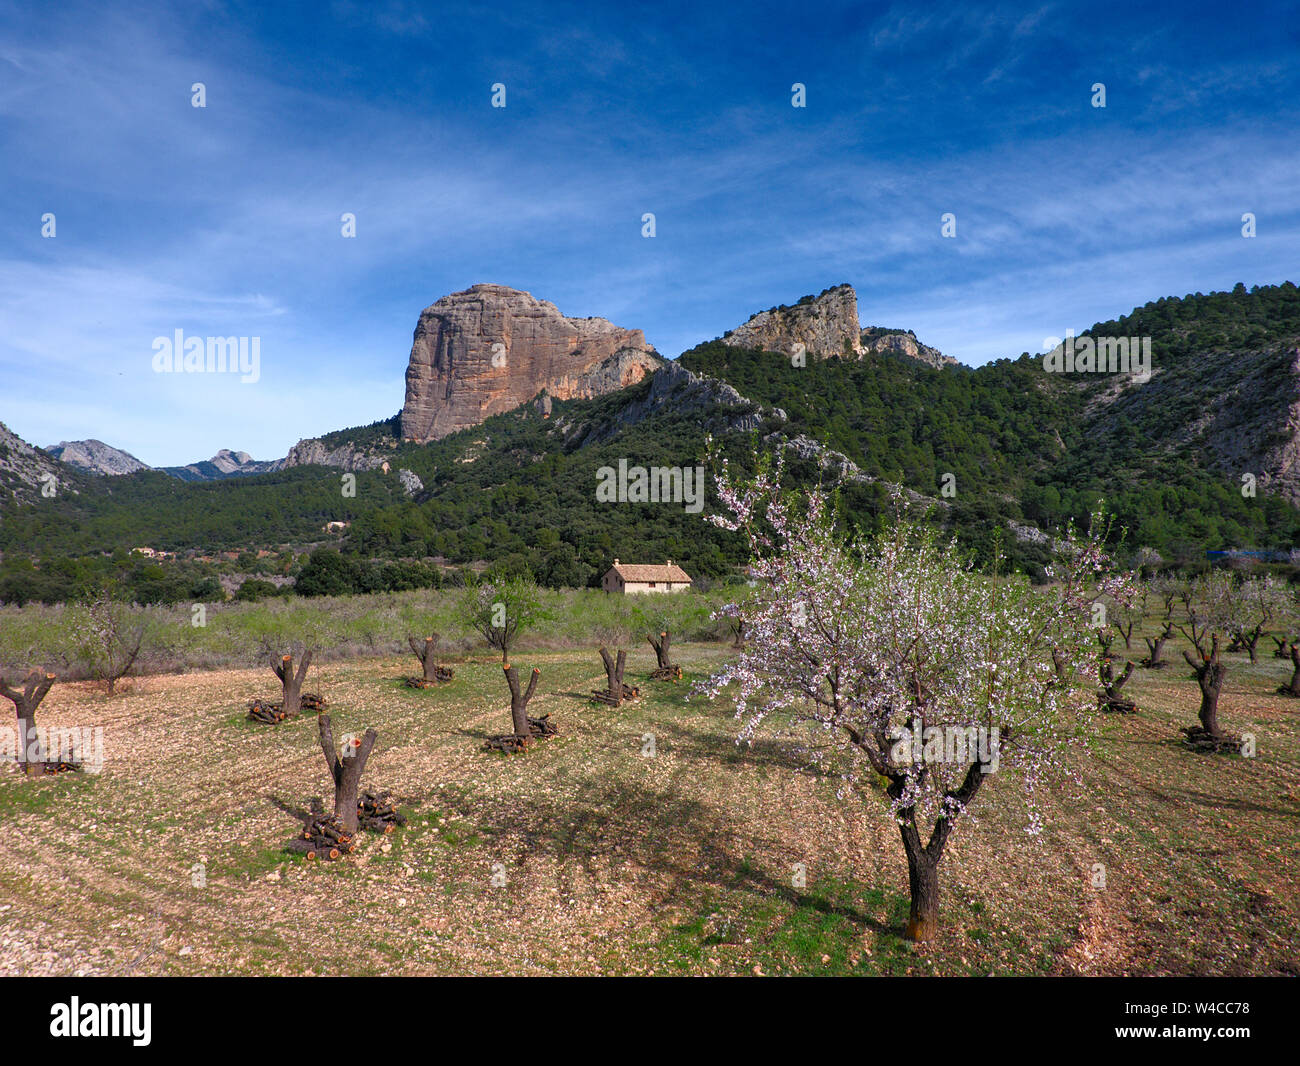 Views of the natural park dels ports with some flowering trees and spectacular rocks Stock Photo